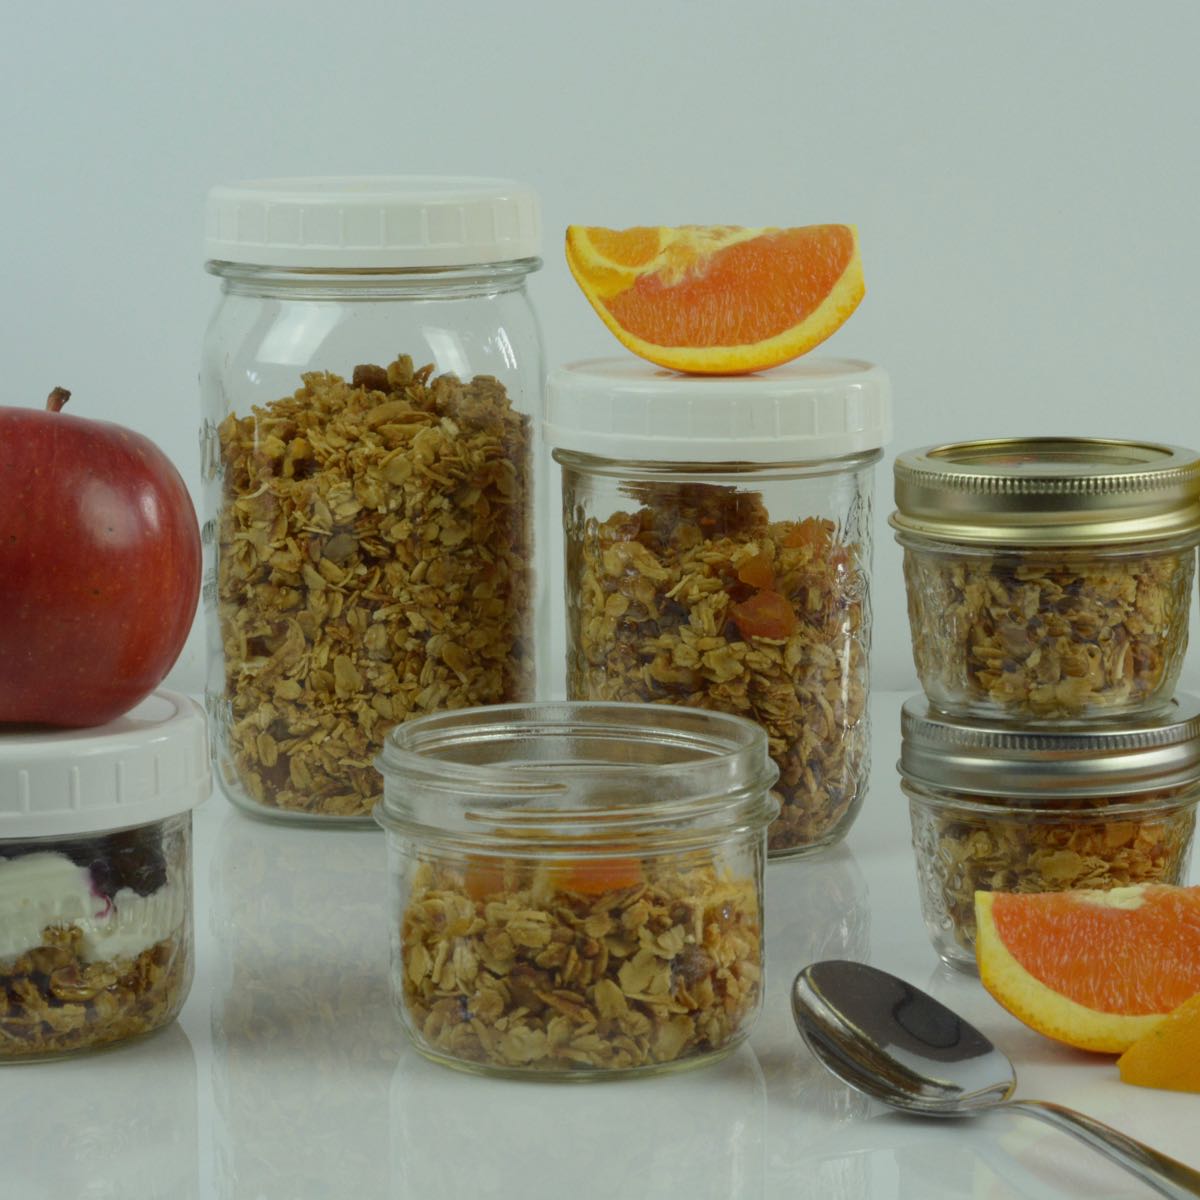 Jars filled with Gluten Free Pistachio Apricot Granola topped with apples and oranges.